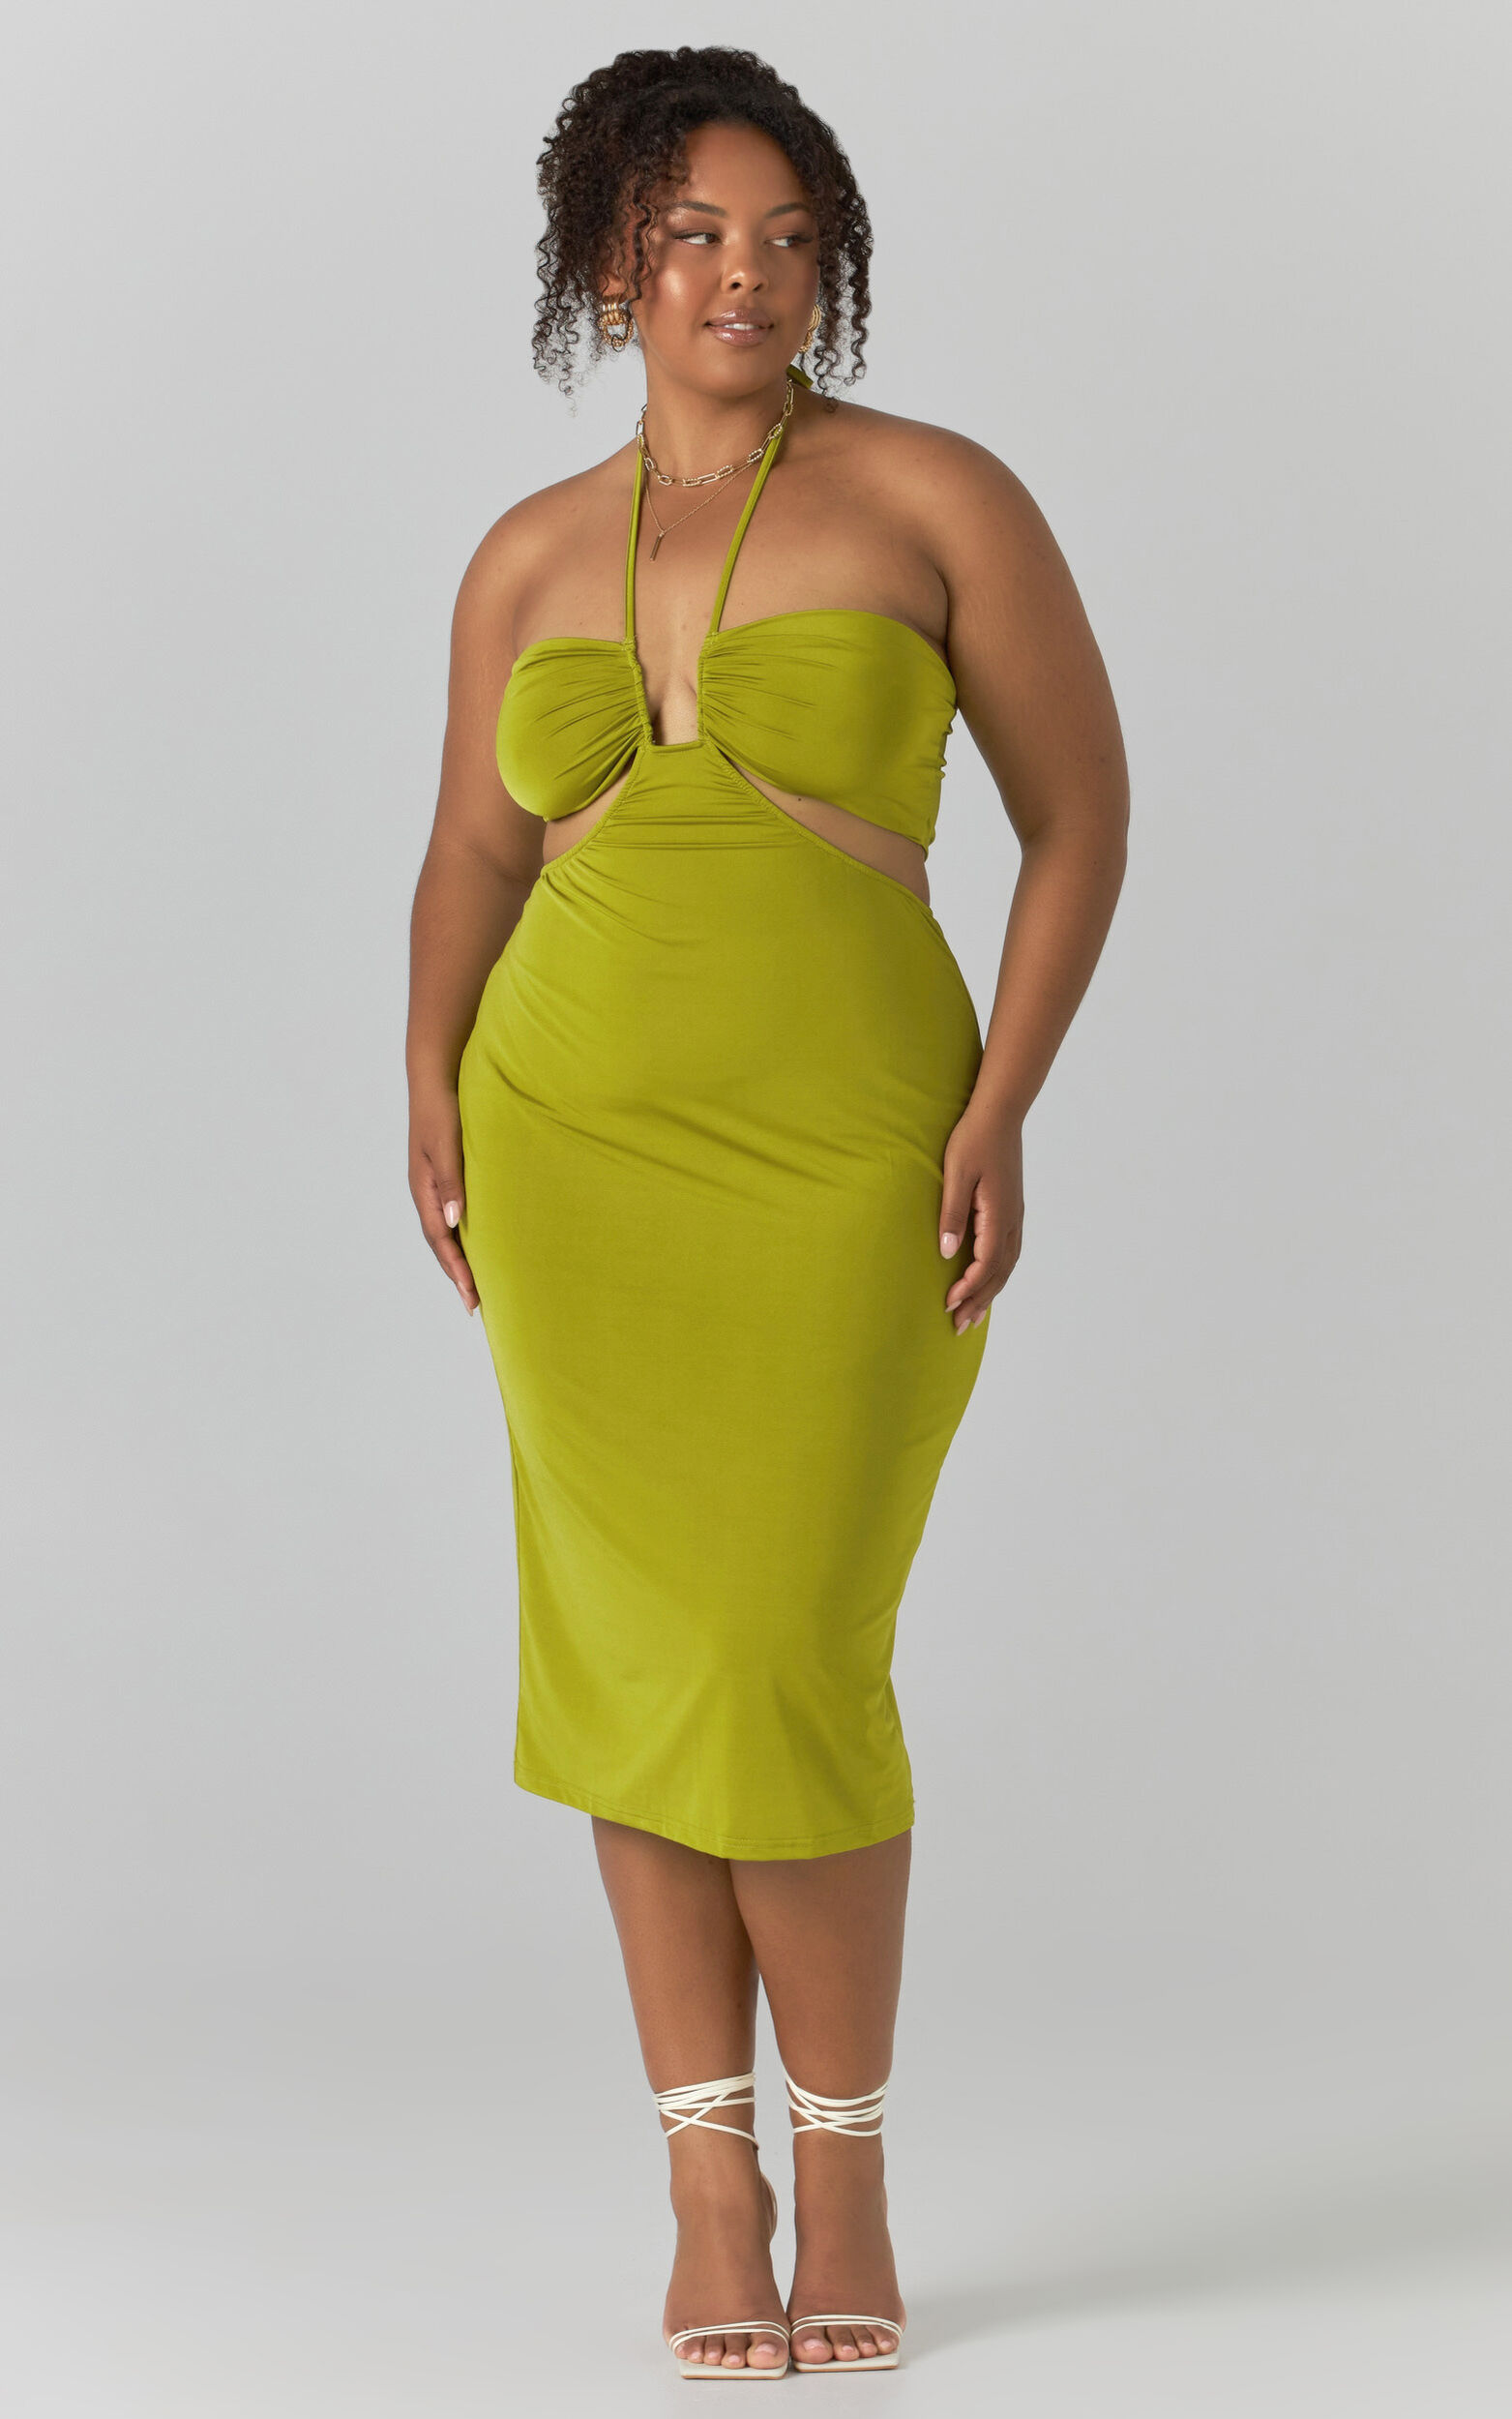 Heath Cut Out Halter Neck Midi Dress in Chartreuse - 04, YEL1, super-hi-res image number null